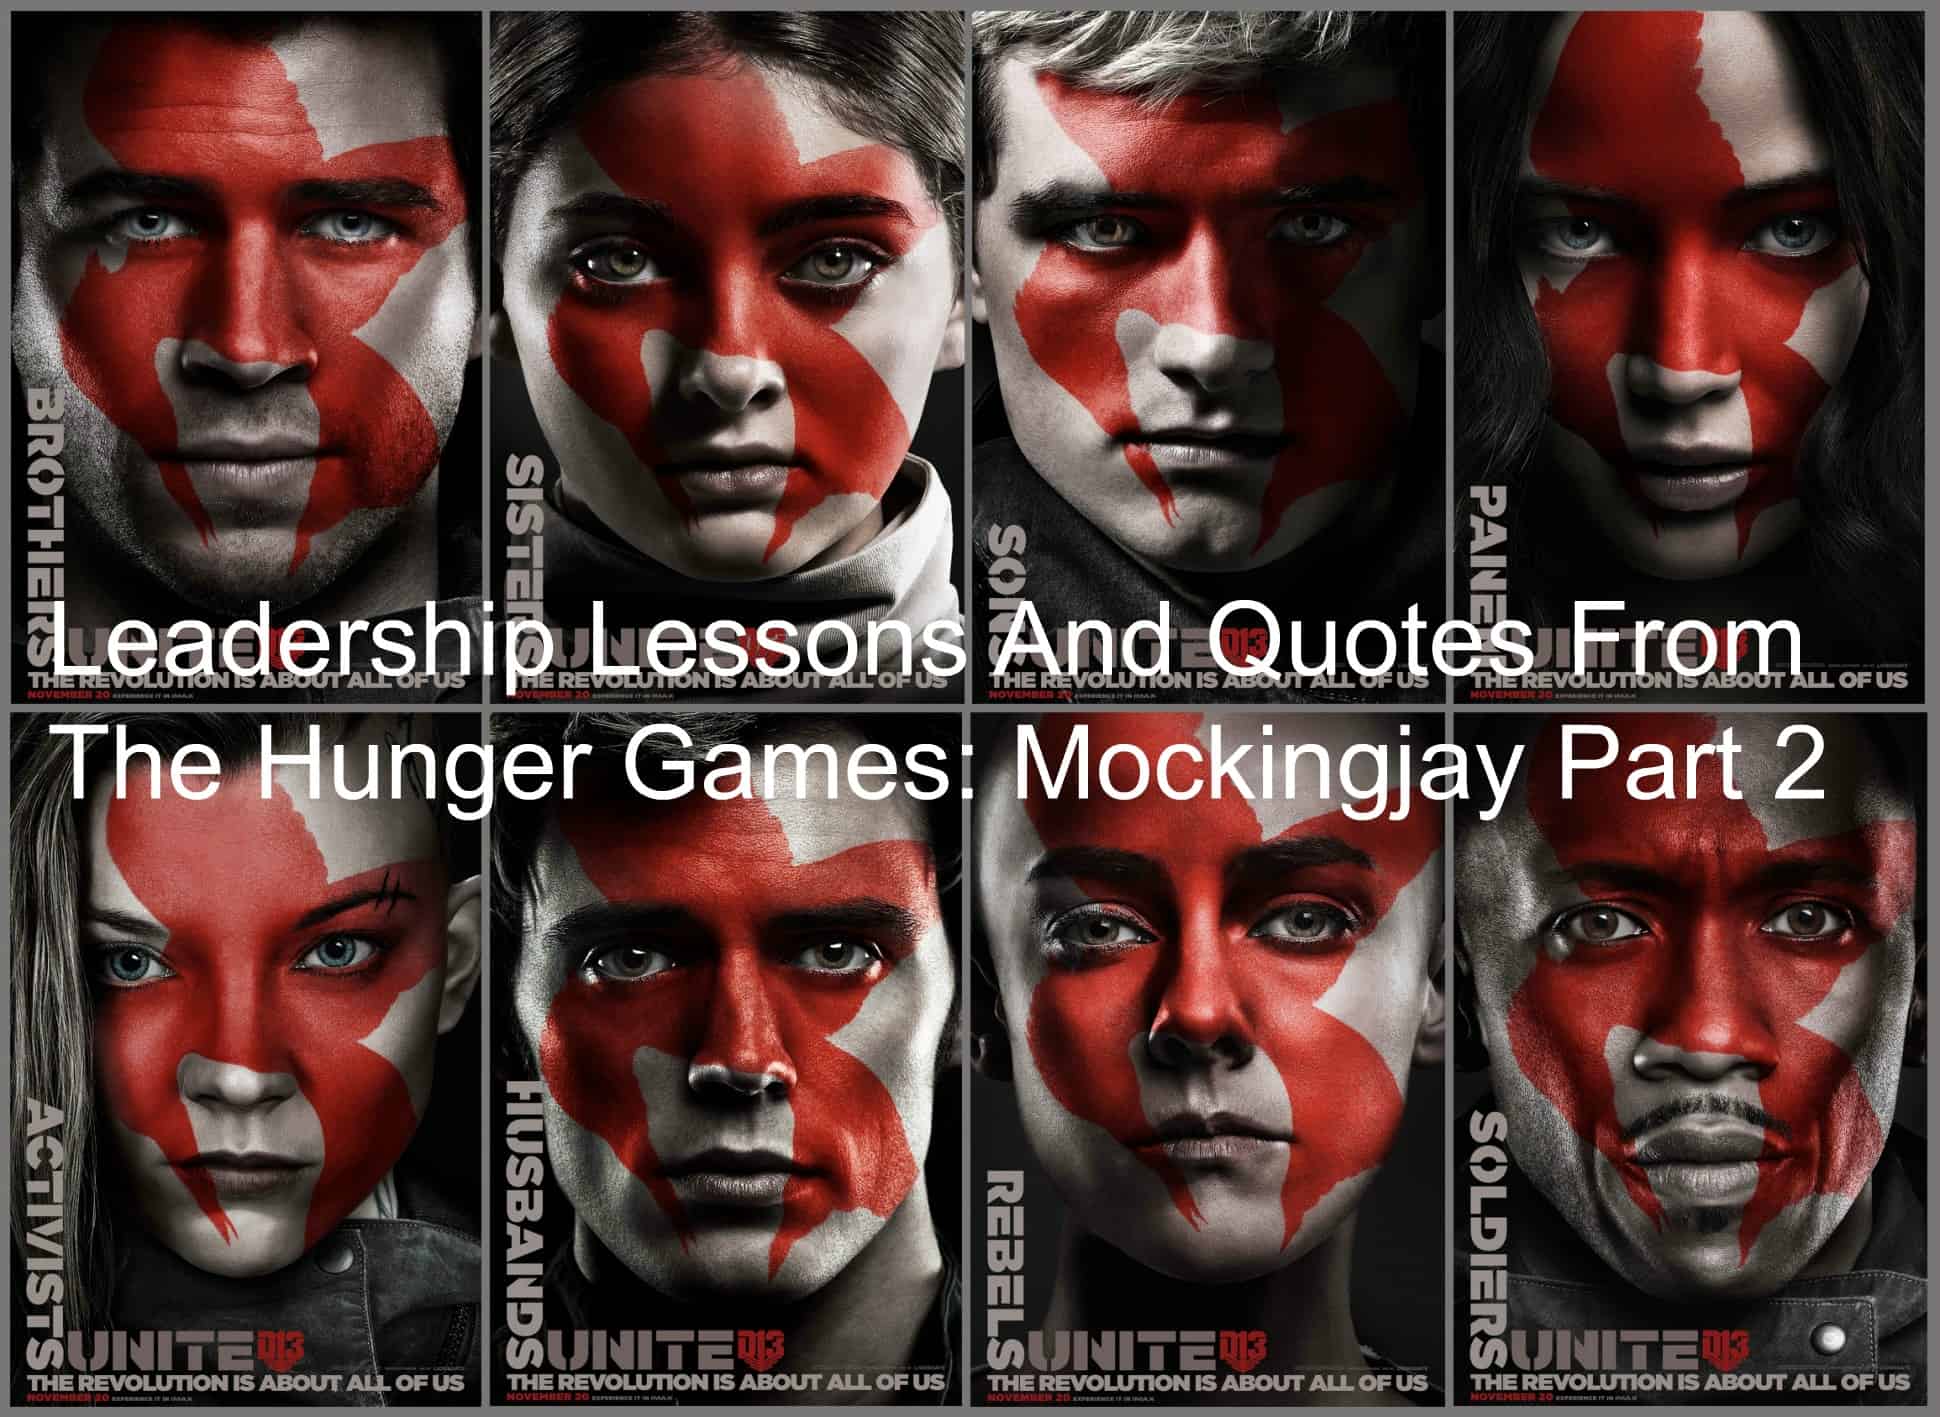 13 Leadership Lessons And Quotes From The Hunger Games Mockingjay Part 2